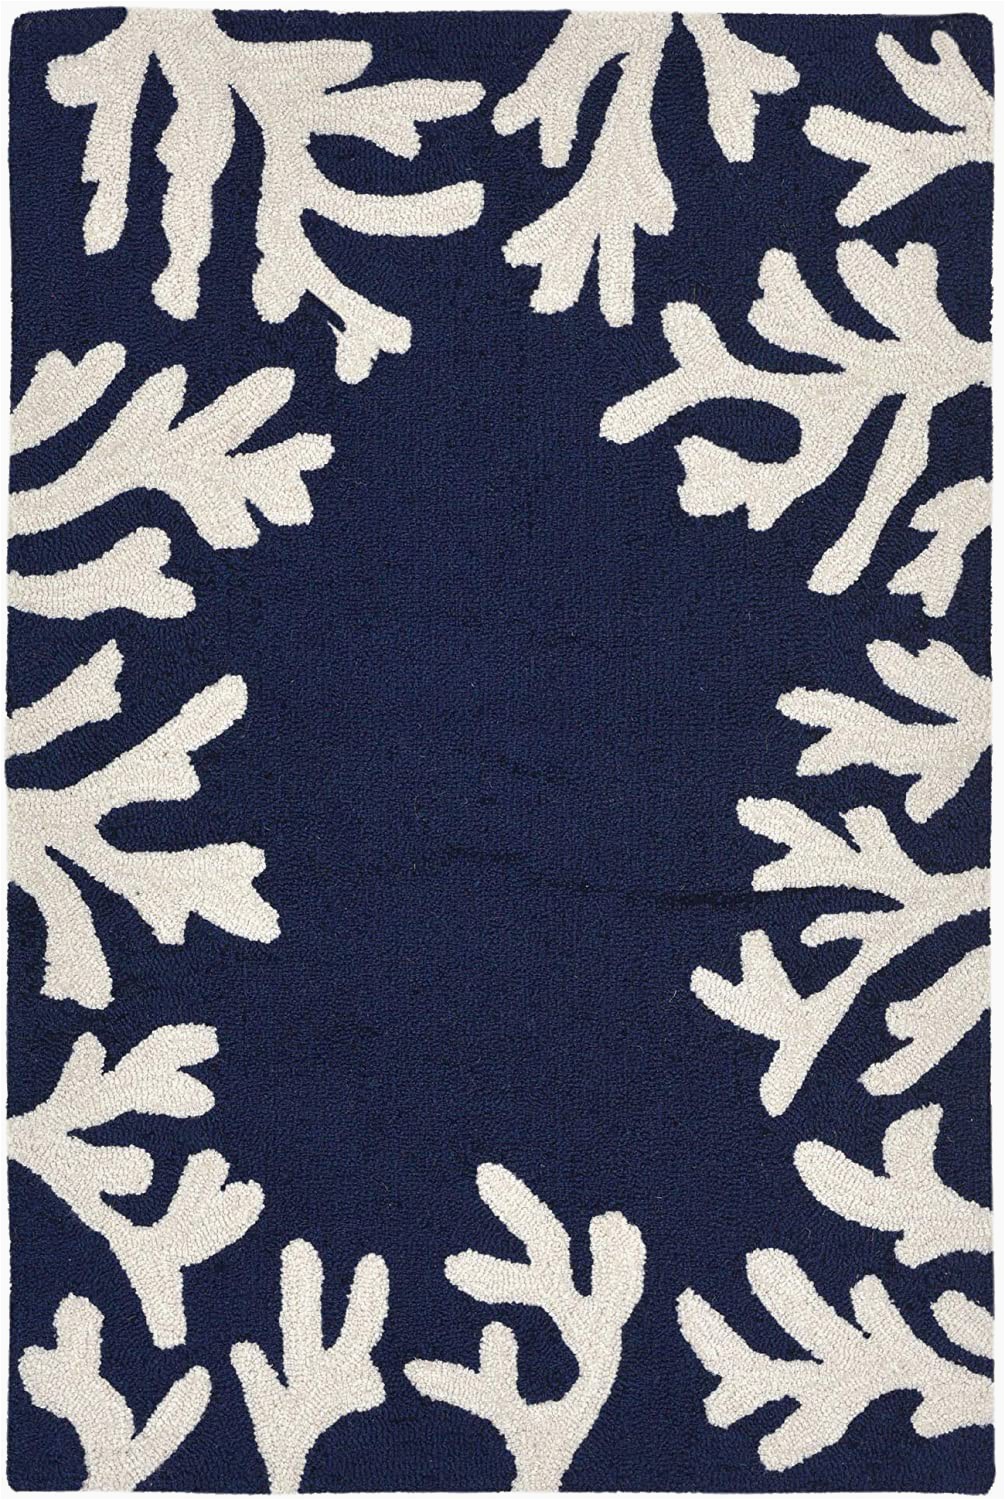 Navy and Coral area Rug Liora Manne Capri Shell Coral Reef Indoor Outdoor Modern area Rug 24"x36" Border Navy